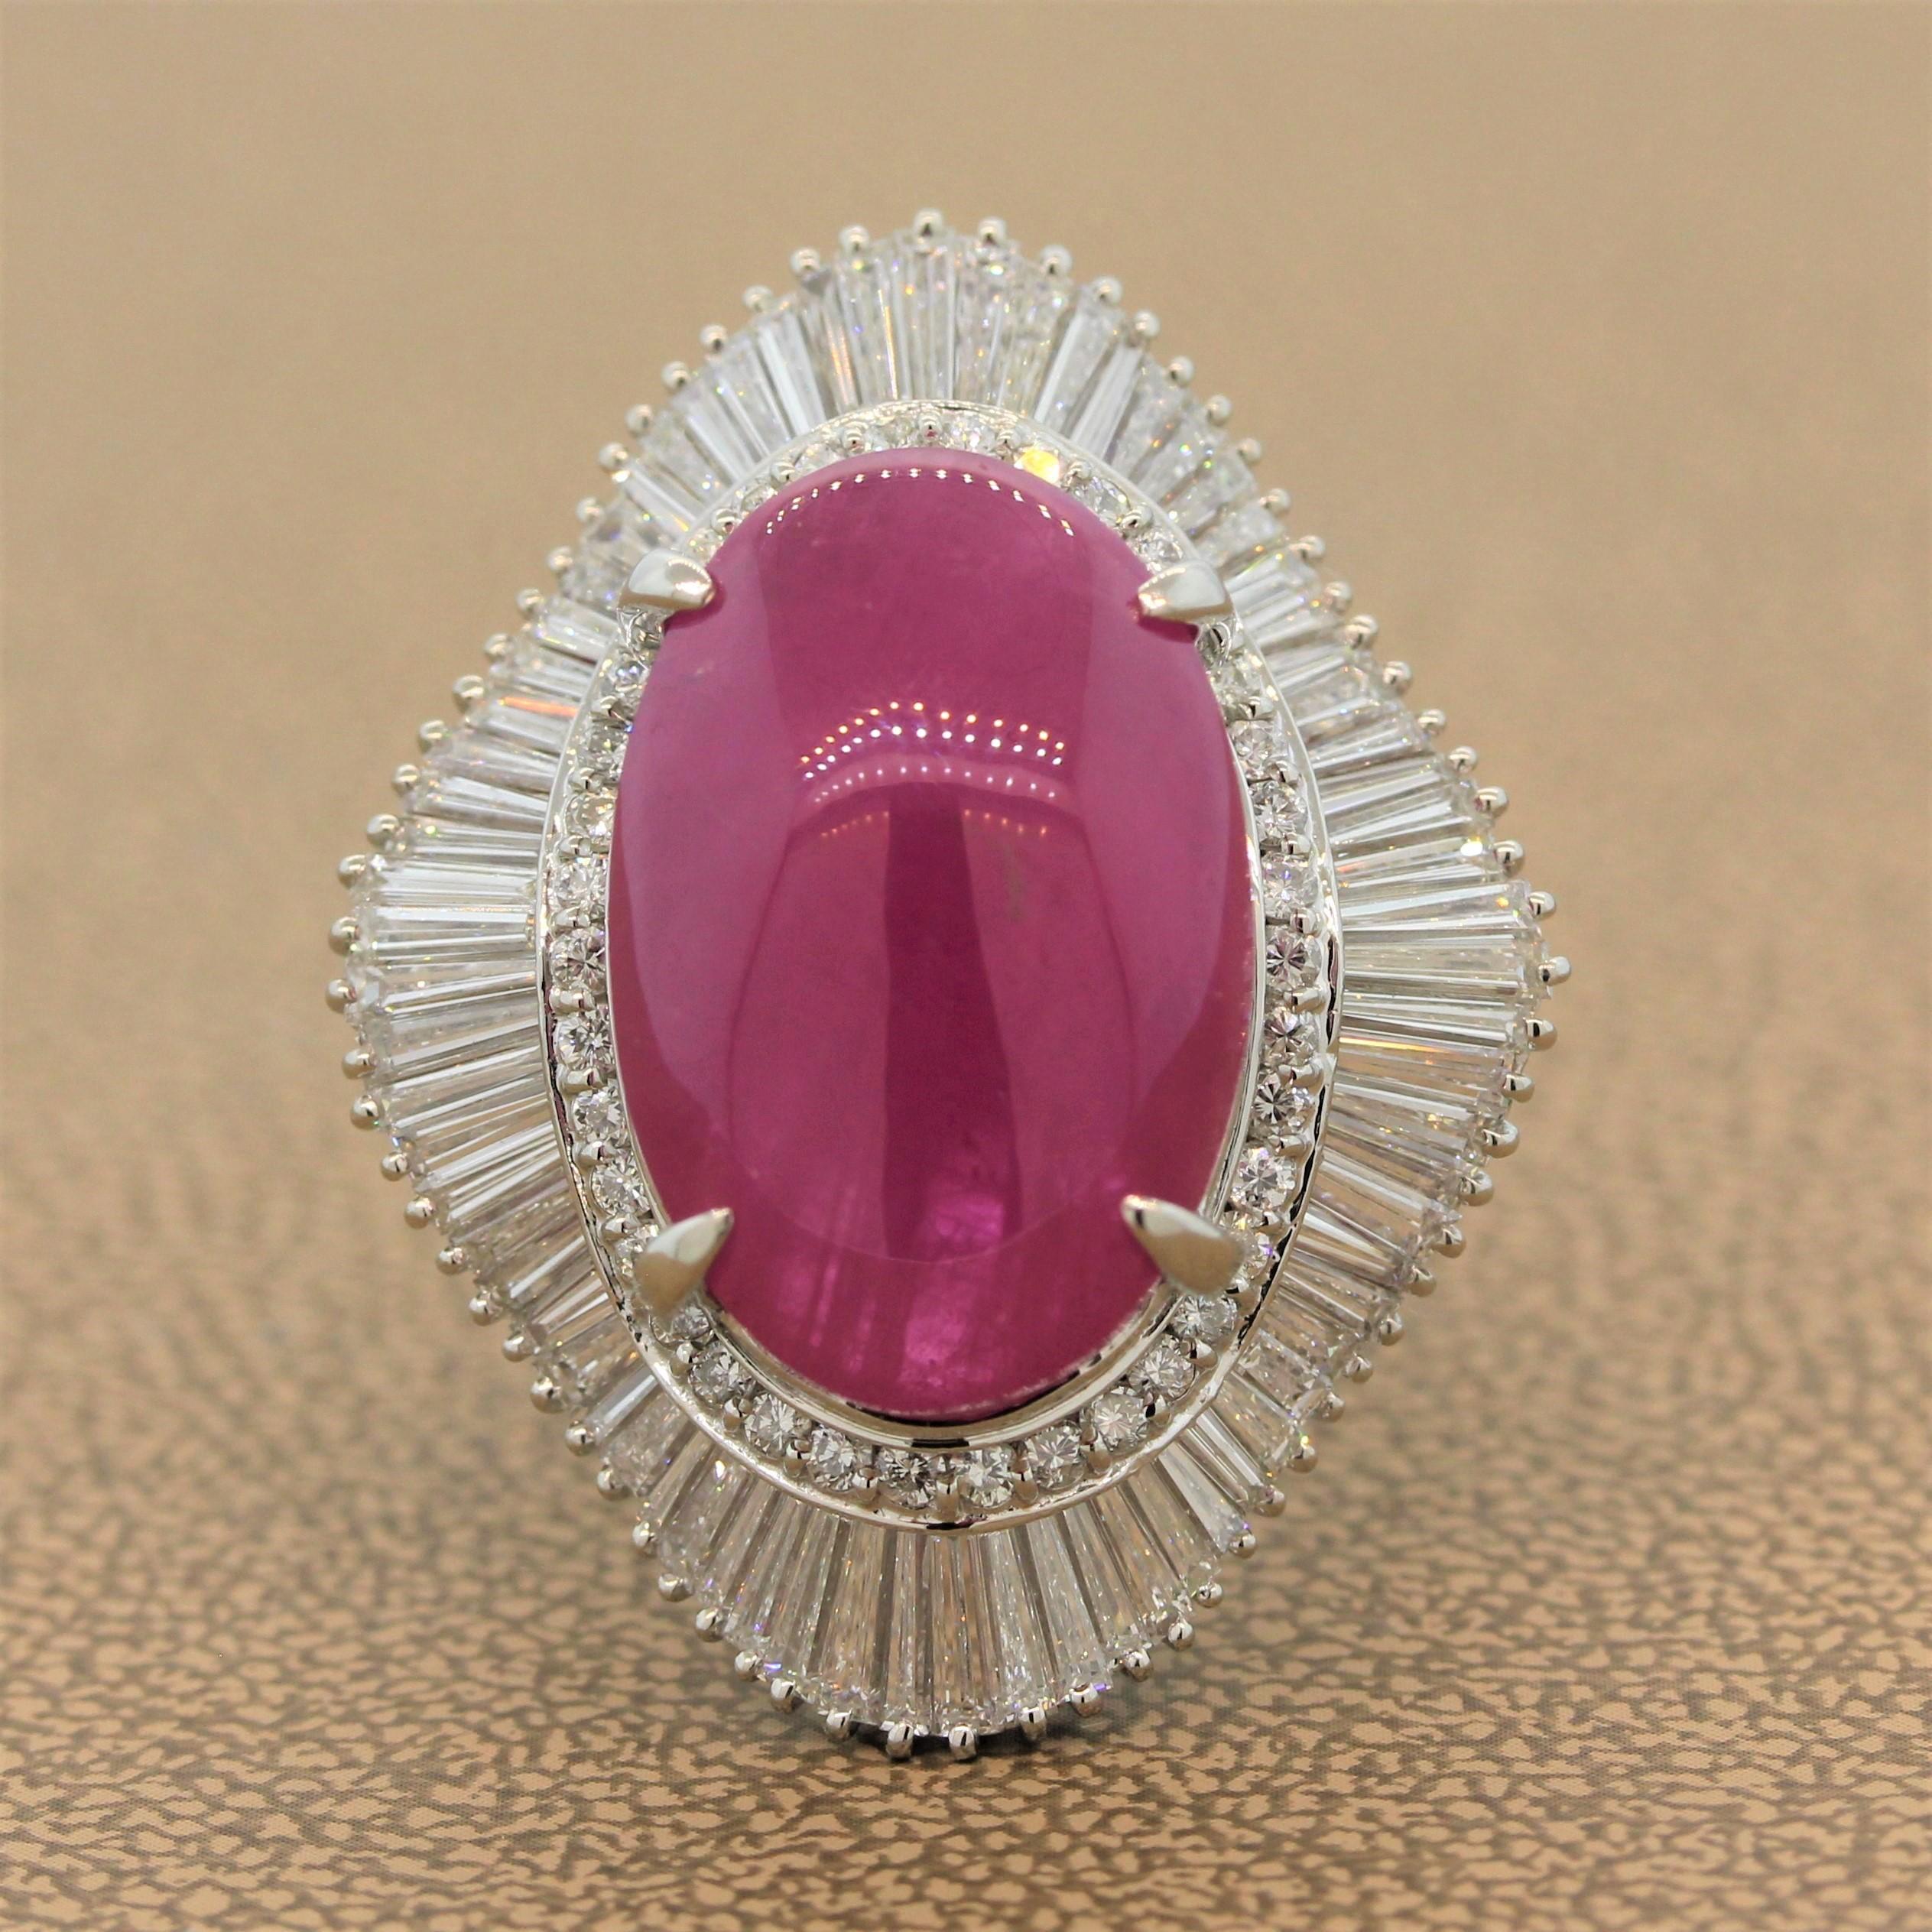 A remarkable gem-set ring featuring a 28.66 carat ruby in a platinum setting. The elongated oval cabochon ruby is surrounded by a double halo of 2.86 carats of diamonds. The round and baguette cut diamonds are set in a flared design for this